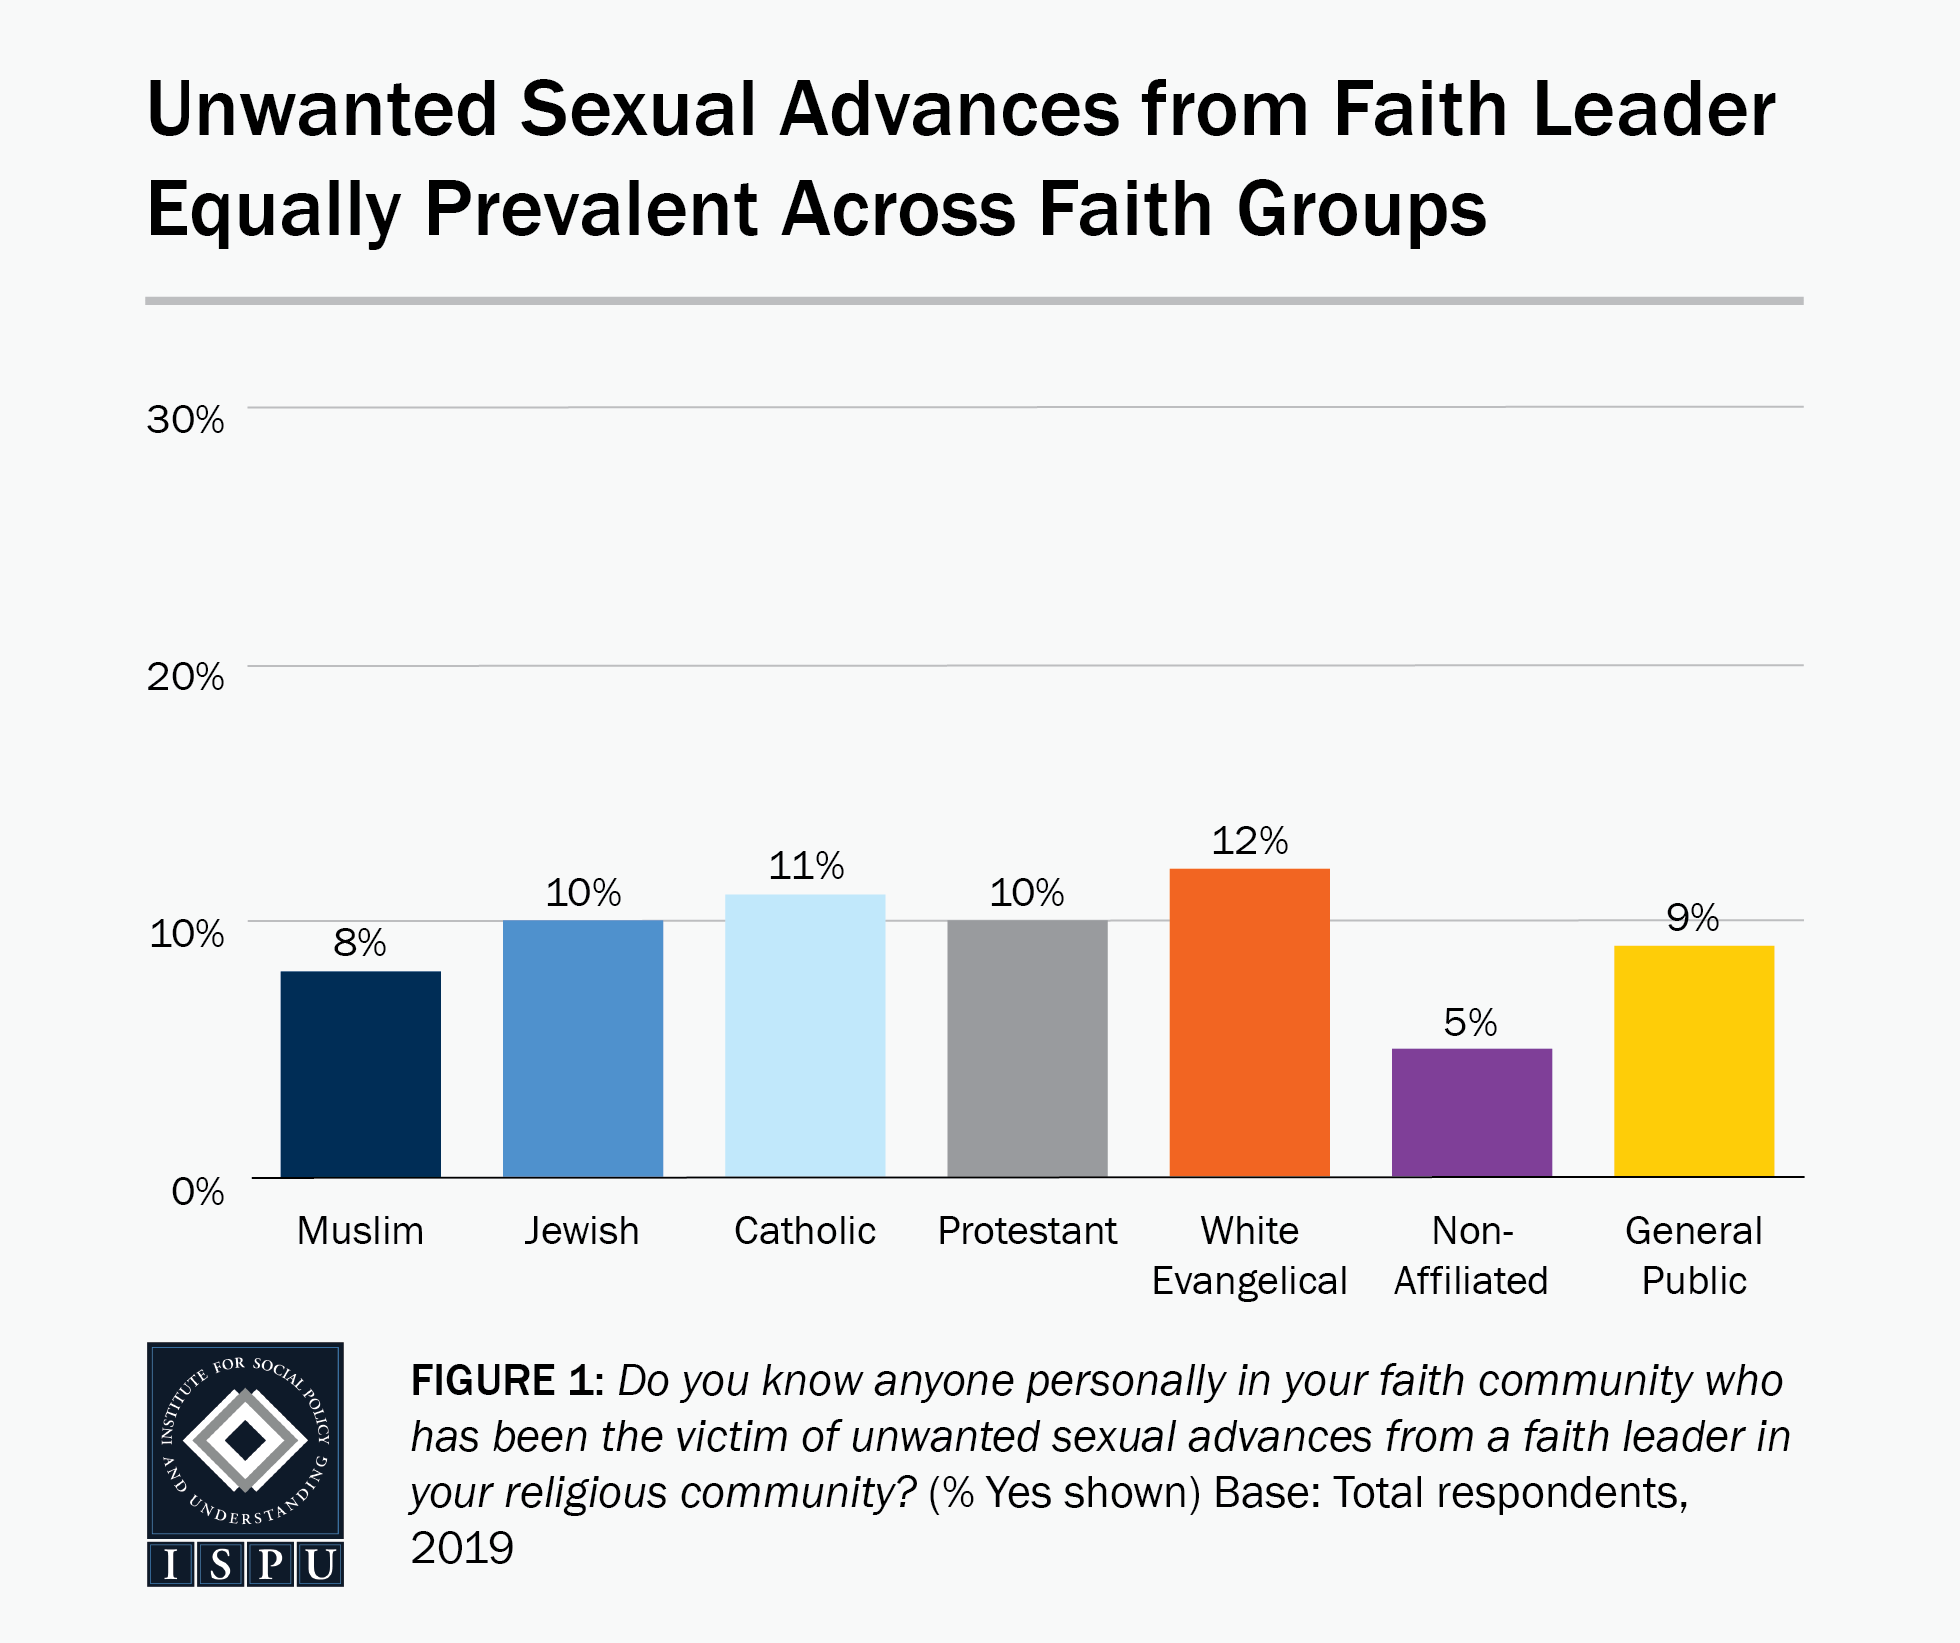 Figure 1: A bar graph showing that unwanted sexual advances from faith leaders are equally prevalent across faith groups